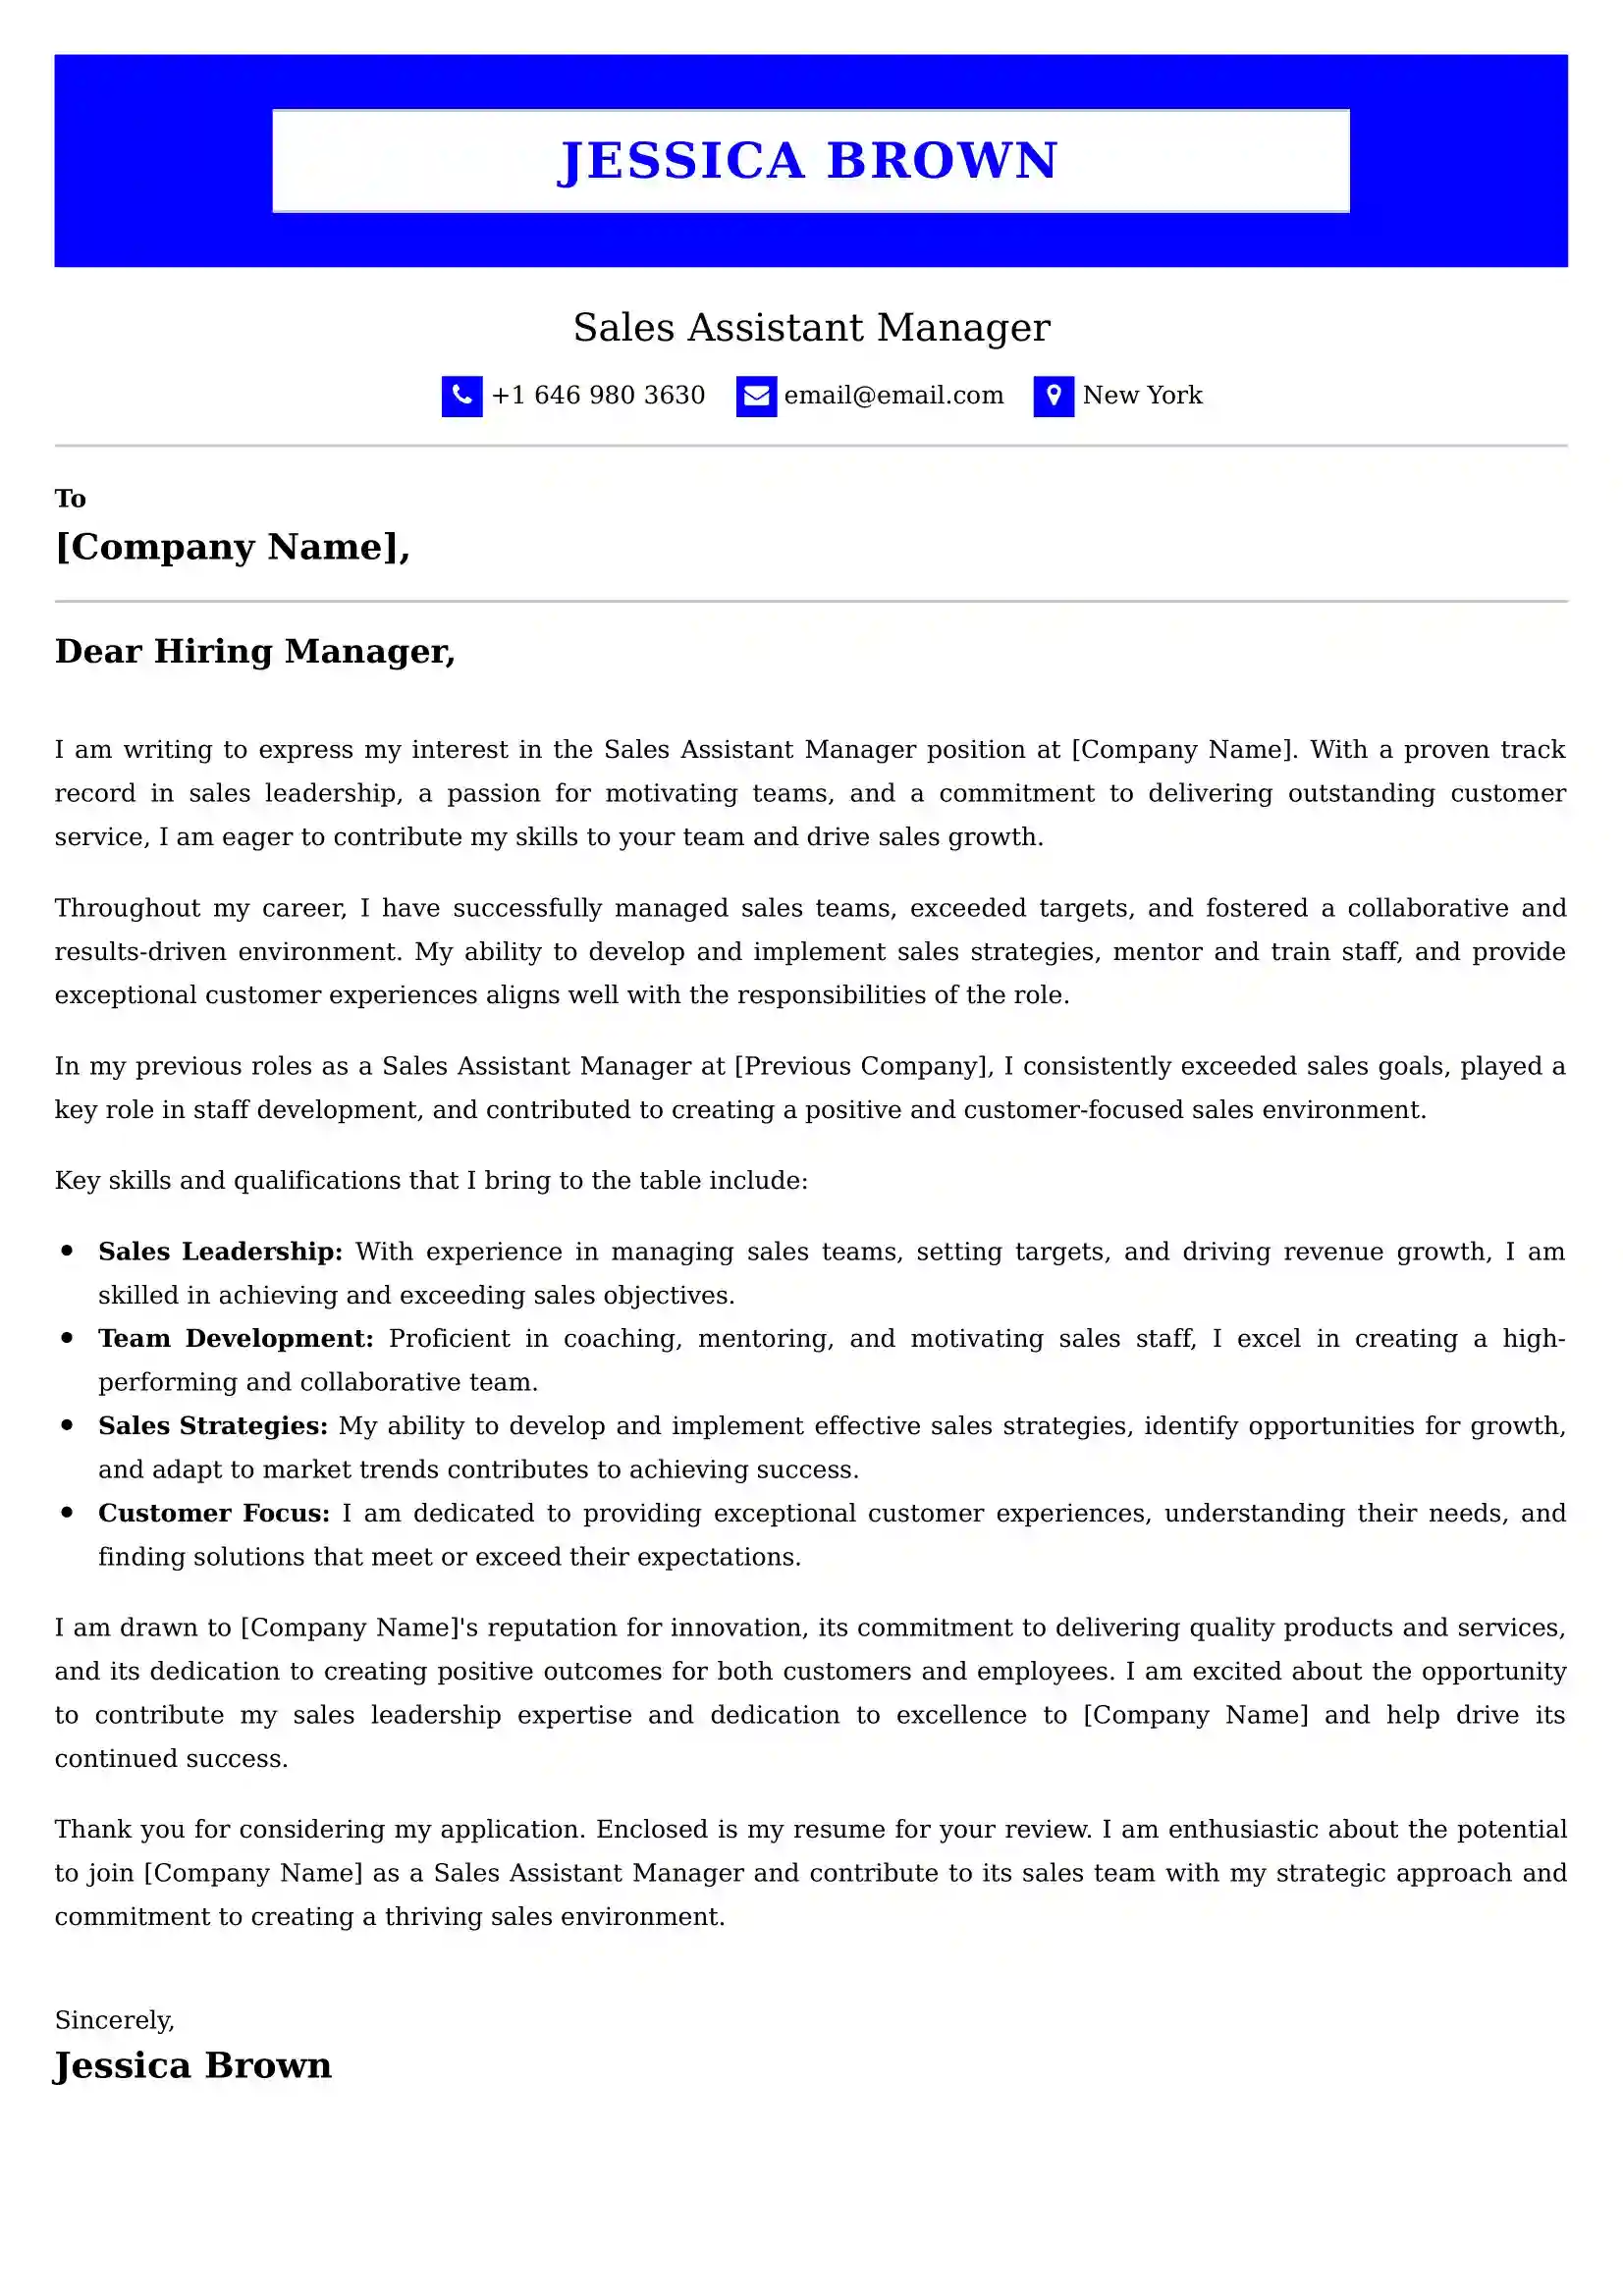 Sales Assistant Manager Cover Letter Examples UK - Tips and Guide